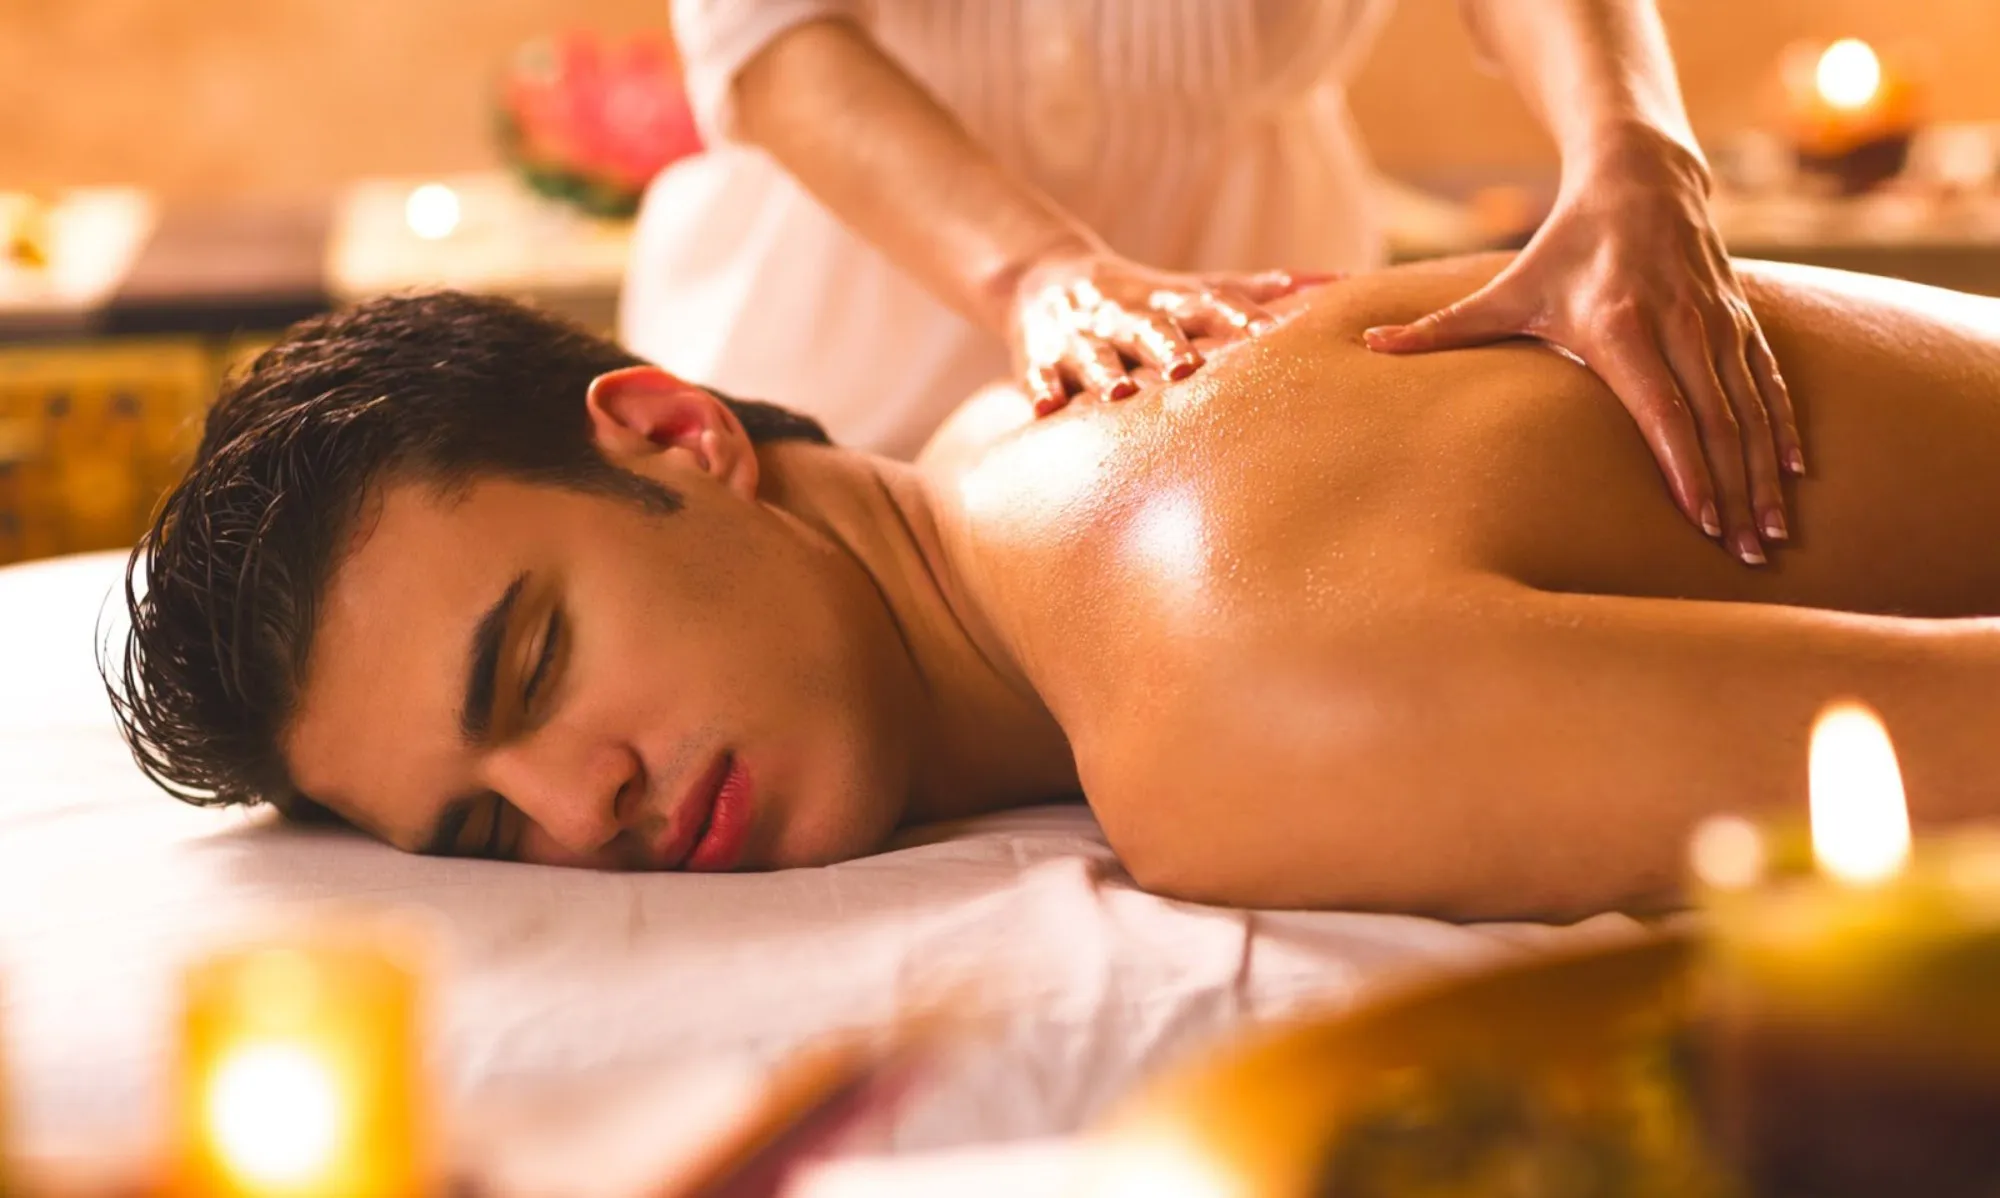 Prestige Massage in Turkey, Central Asia | Massage Parlors,Sex-Friendly Places - Rated 0.6